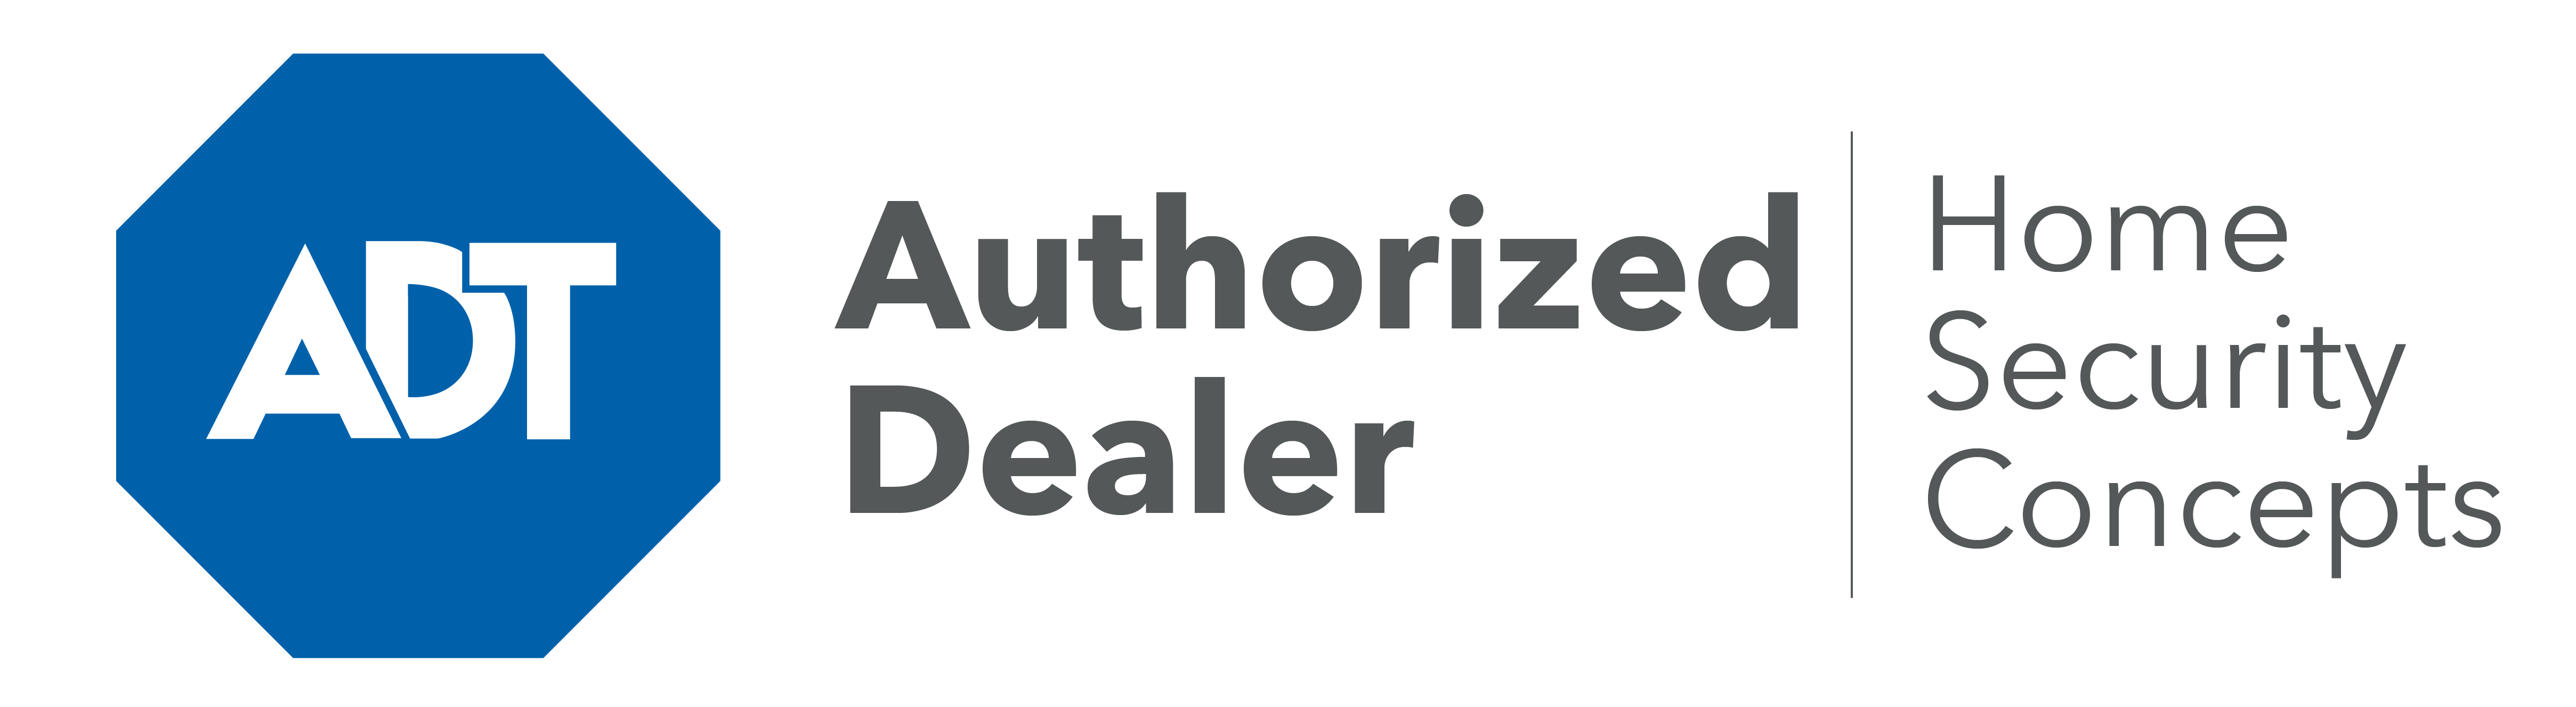 ADT Authorized Dealer - Home Security Concepts